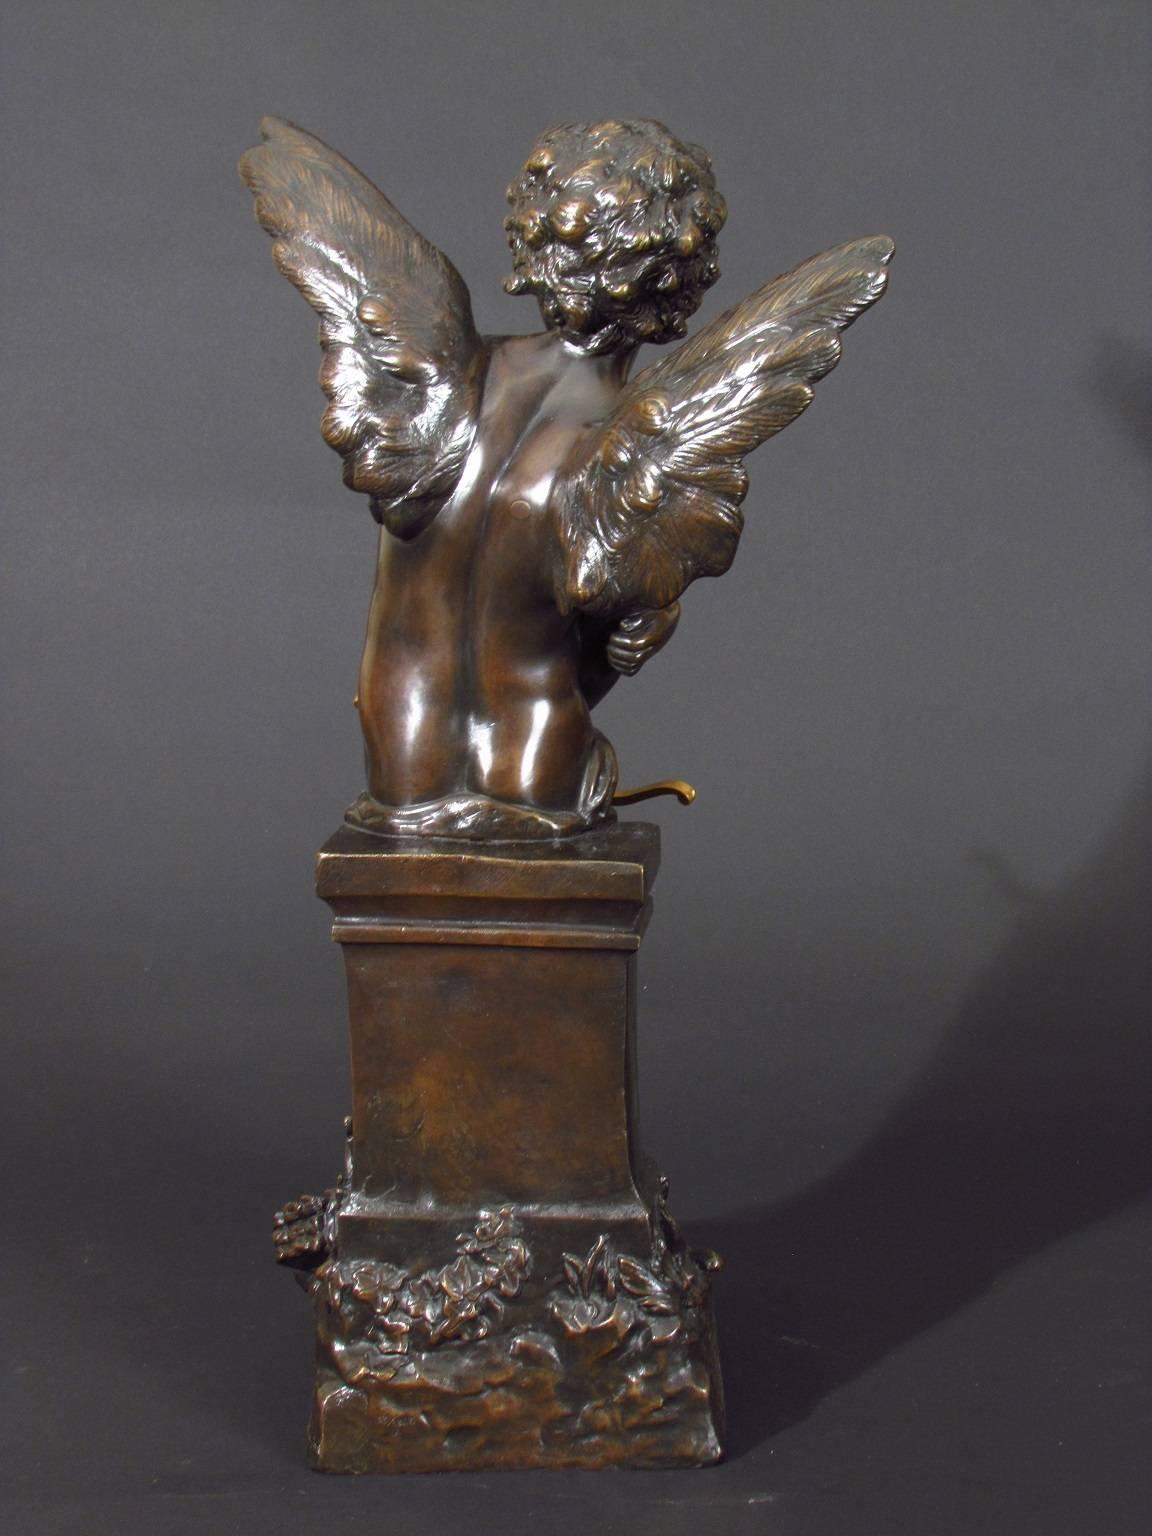 Amour by Hippolyte Moreau

French school antique bronze figure of Cupid with his bow. A charmingly romantic subject displaying the characteristic grace and beauty associated with the notable Moreau family of sculptors.
Titled Amour and based on